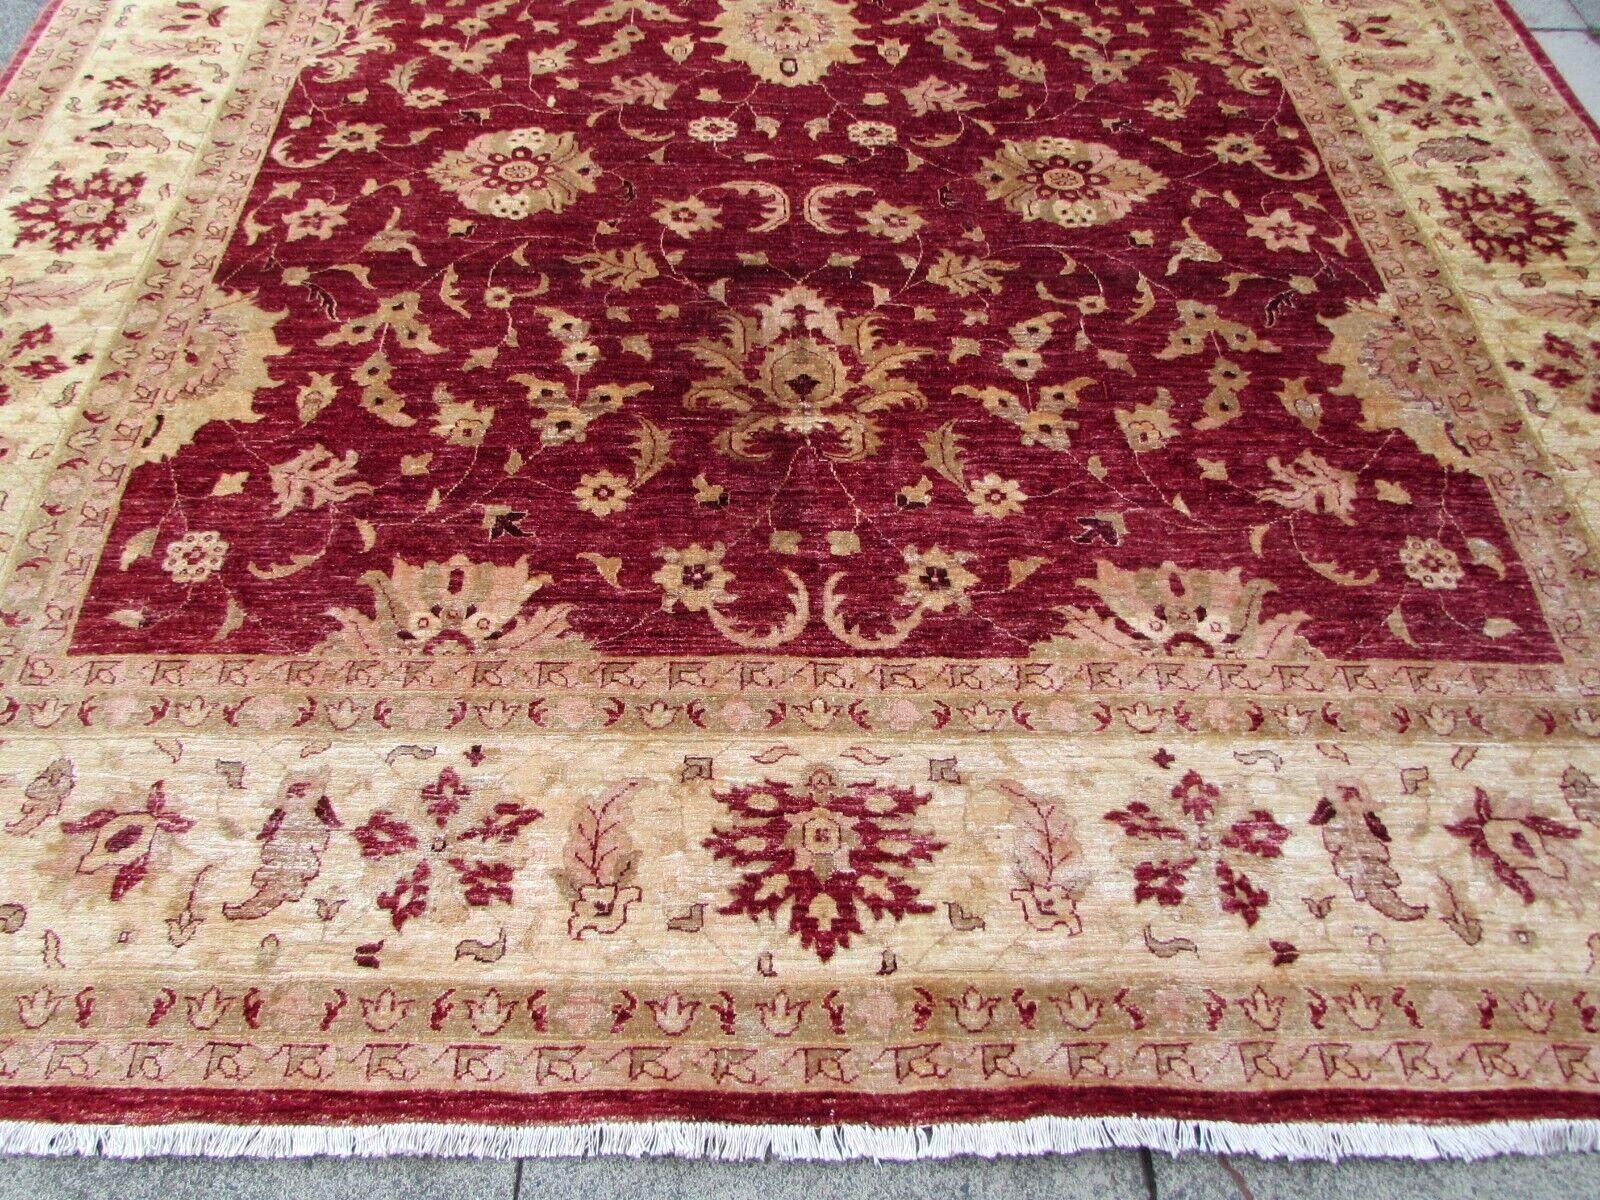 This handmade vintage Afghan Zigler rug from the 1980s is a stunning piece of craftsmanship, made from high-quality wool that is both durable and long-lasting. The wool has been carefully hand-spun and hand-dyed, resulting in a unique texture and